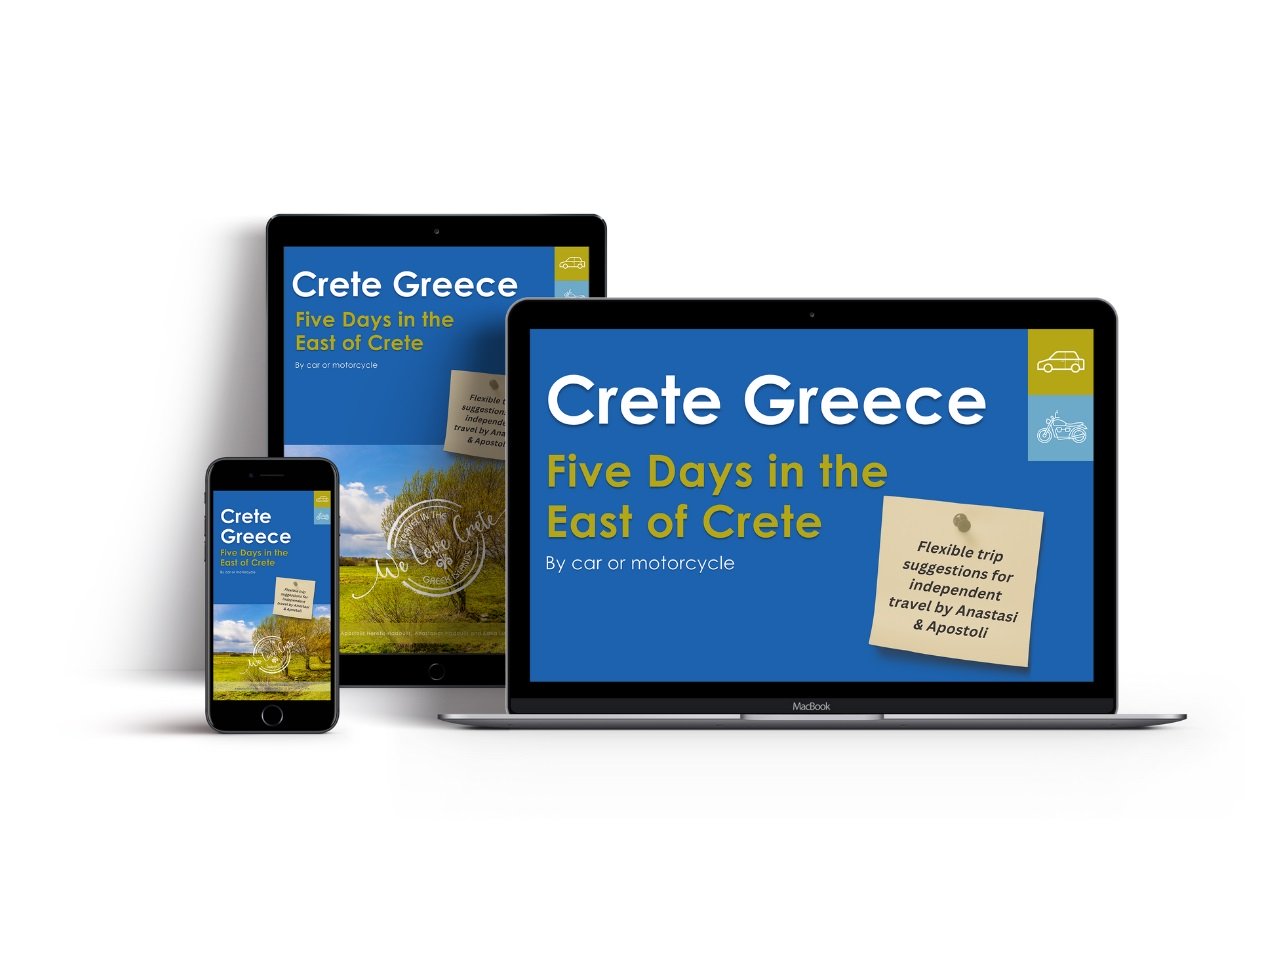 Crete Greece - Trip Ideas - Five Days in the East of Crete by Car or Motorcycle